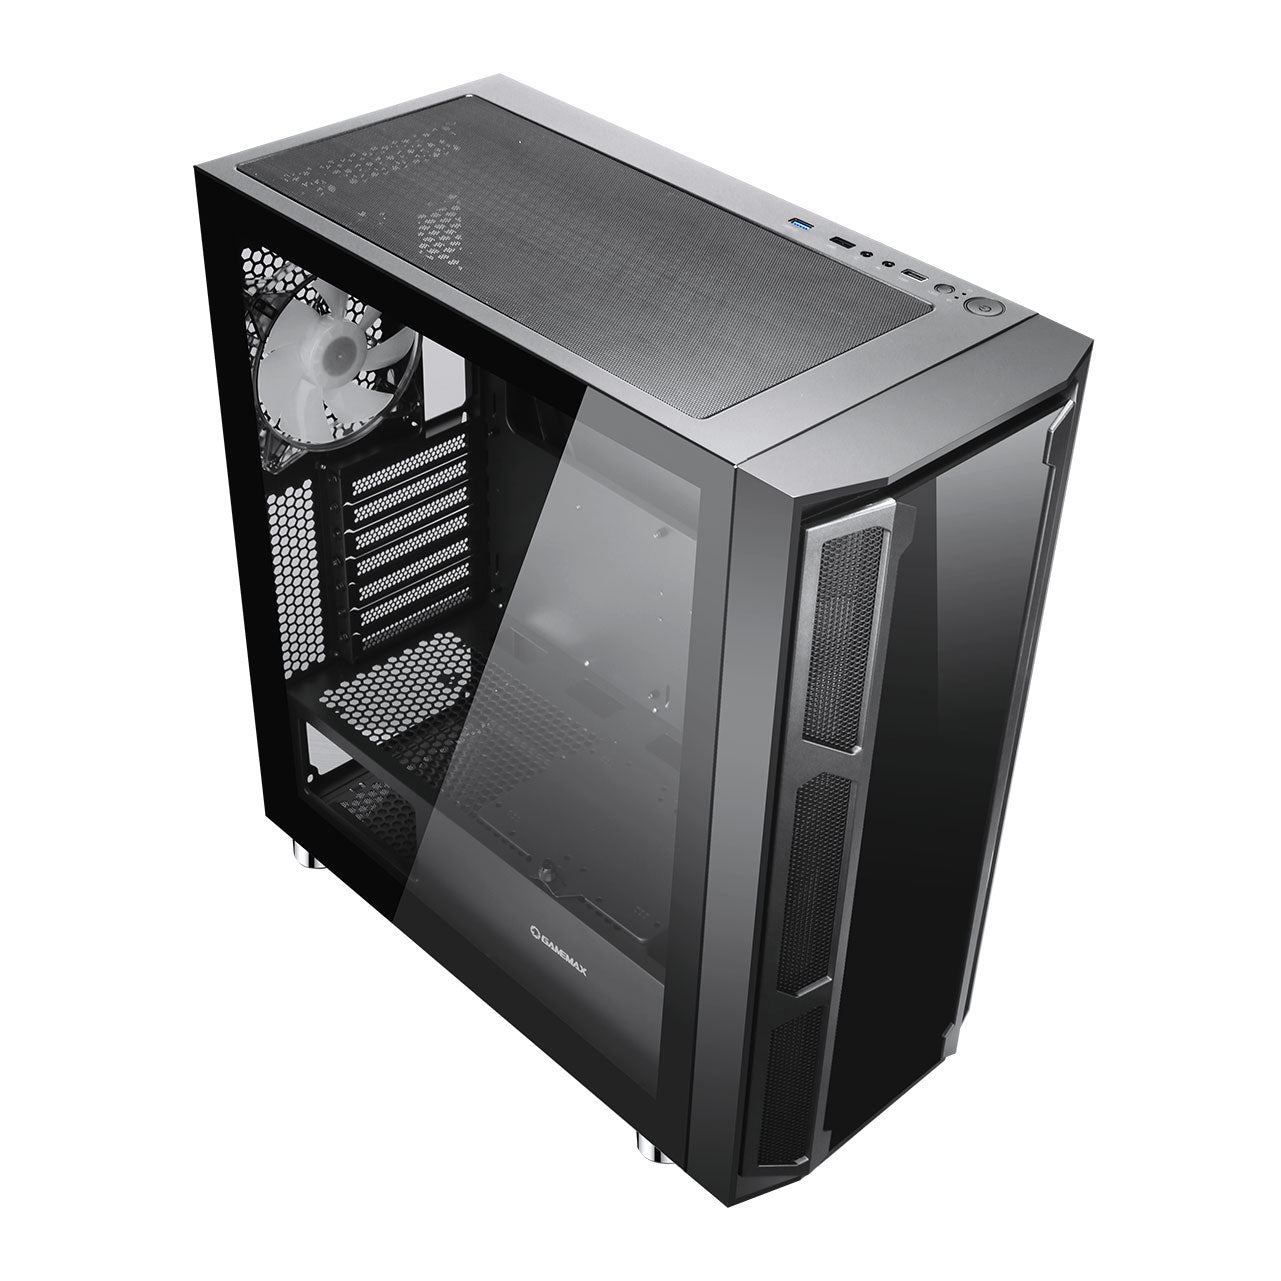 GameMax F15G Windowed Mid Tower PC Gaming Case, Tempered Glass Window